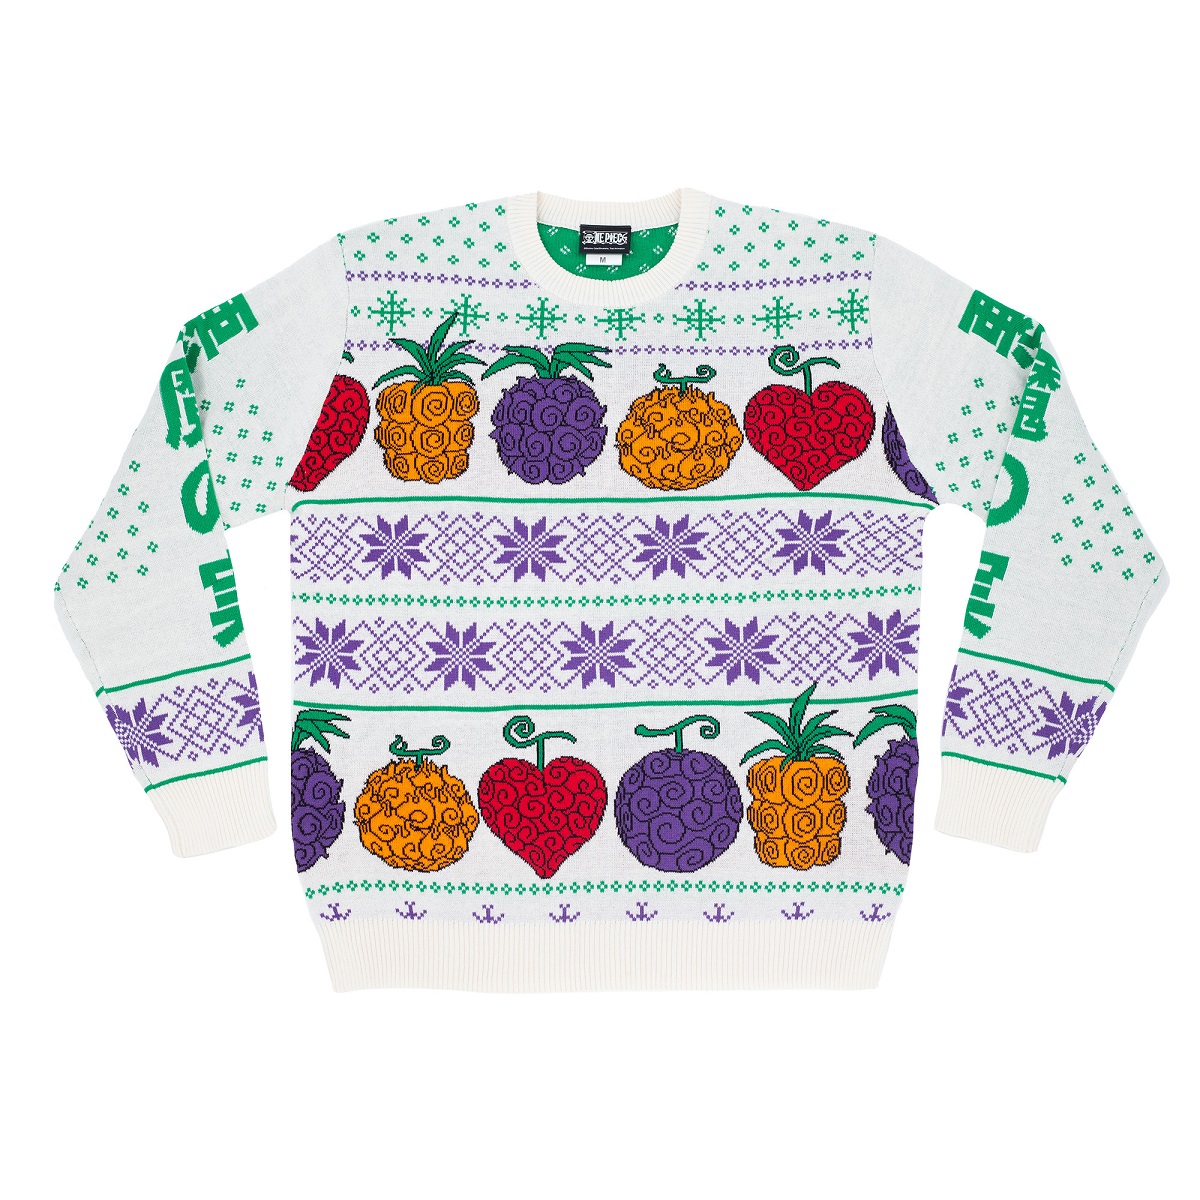 One Piece - Devil Fruit Holiday Sweater - Crunchyroll Exclusive! image count 0